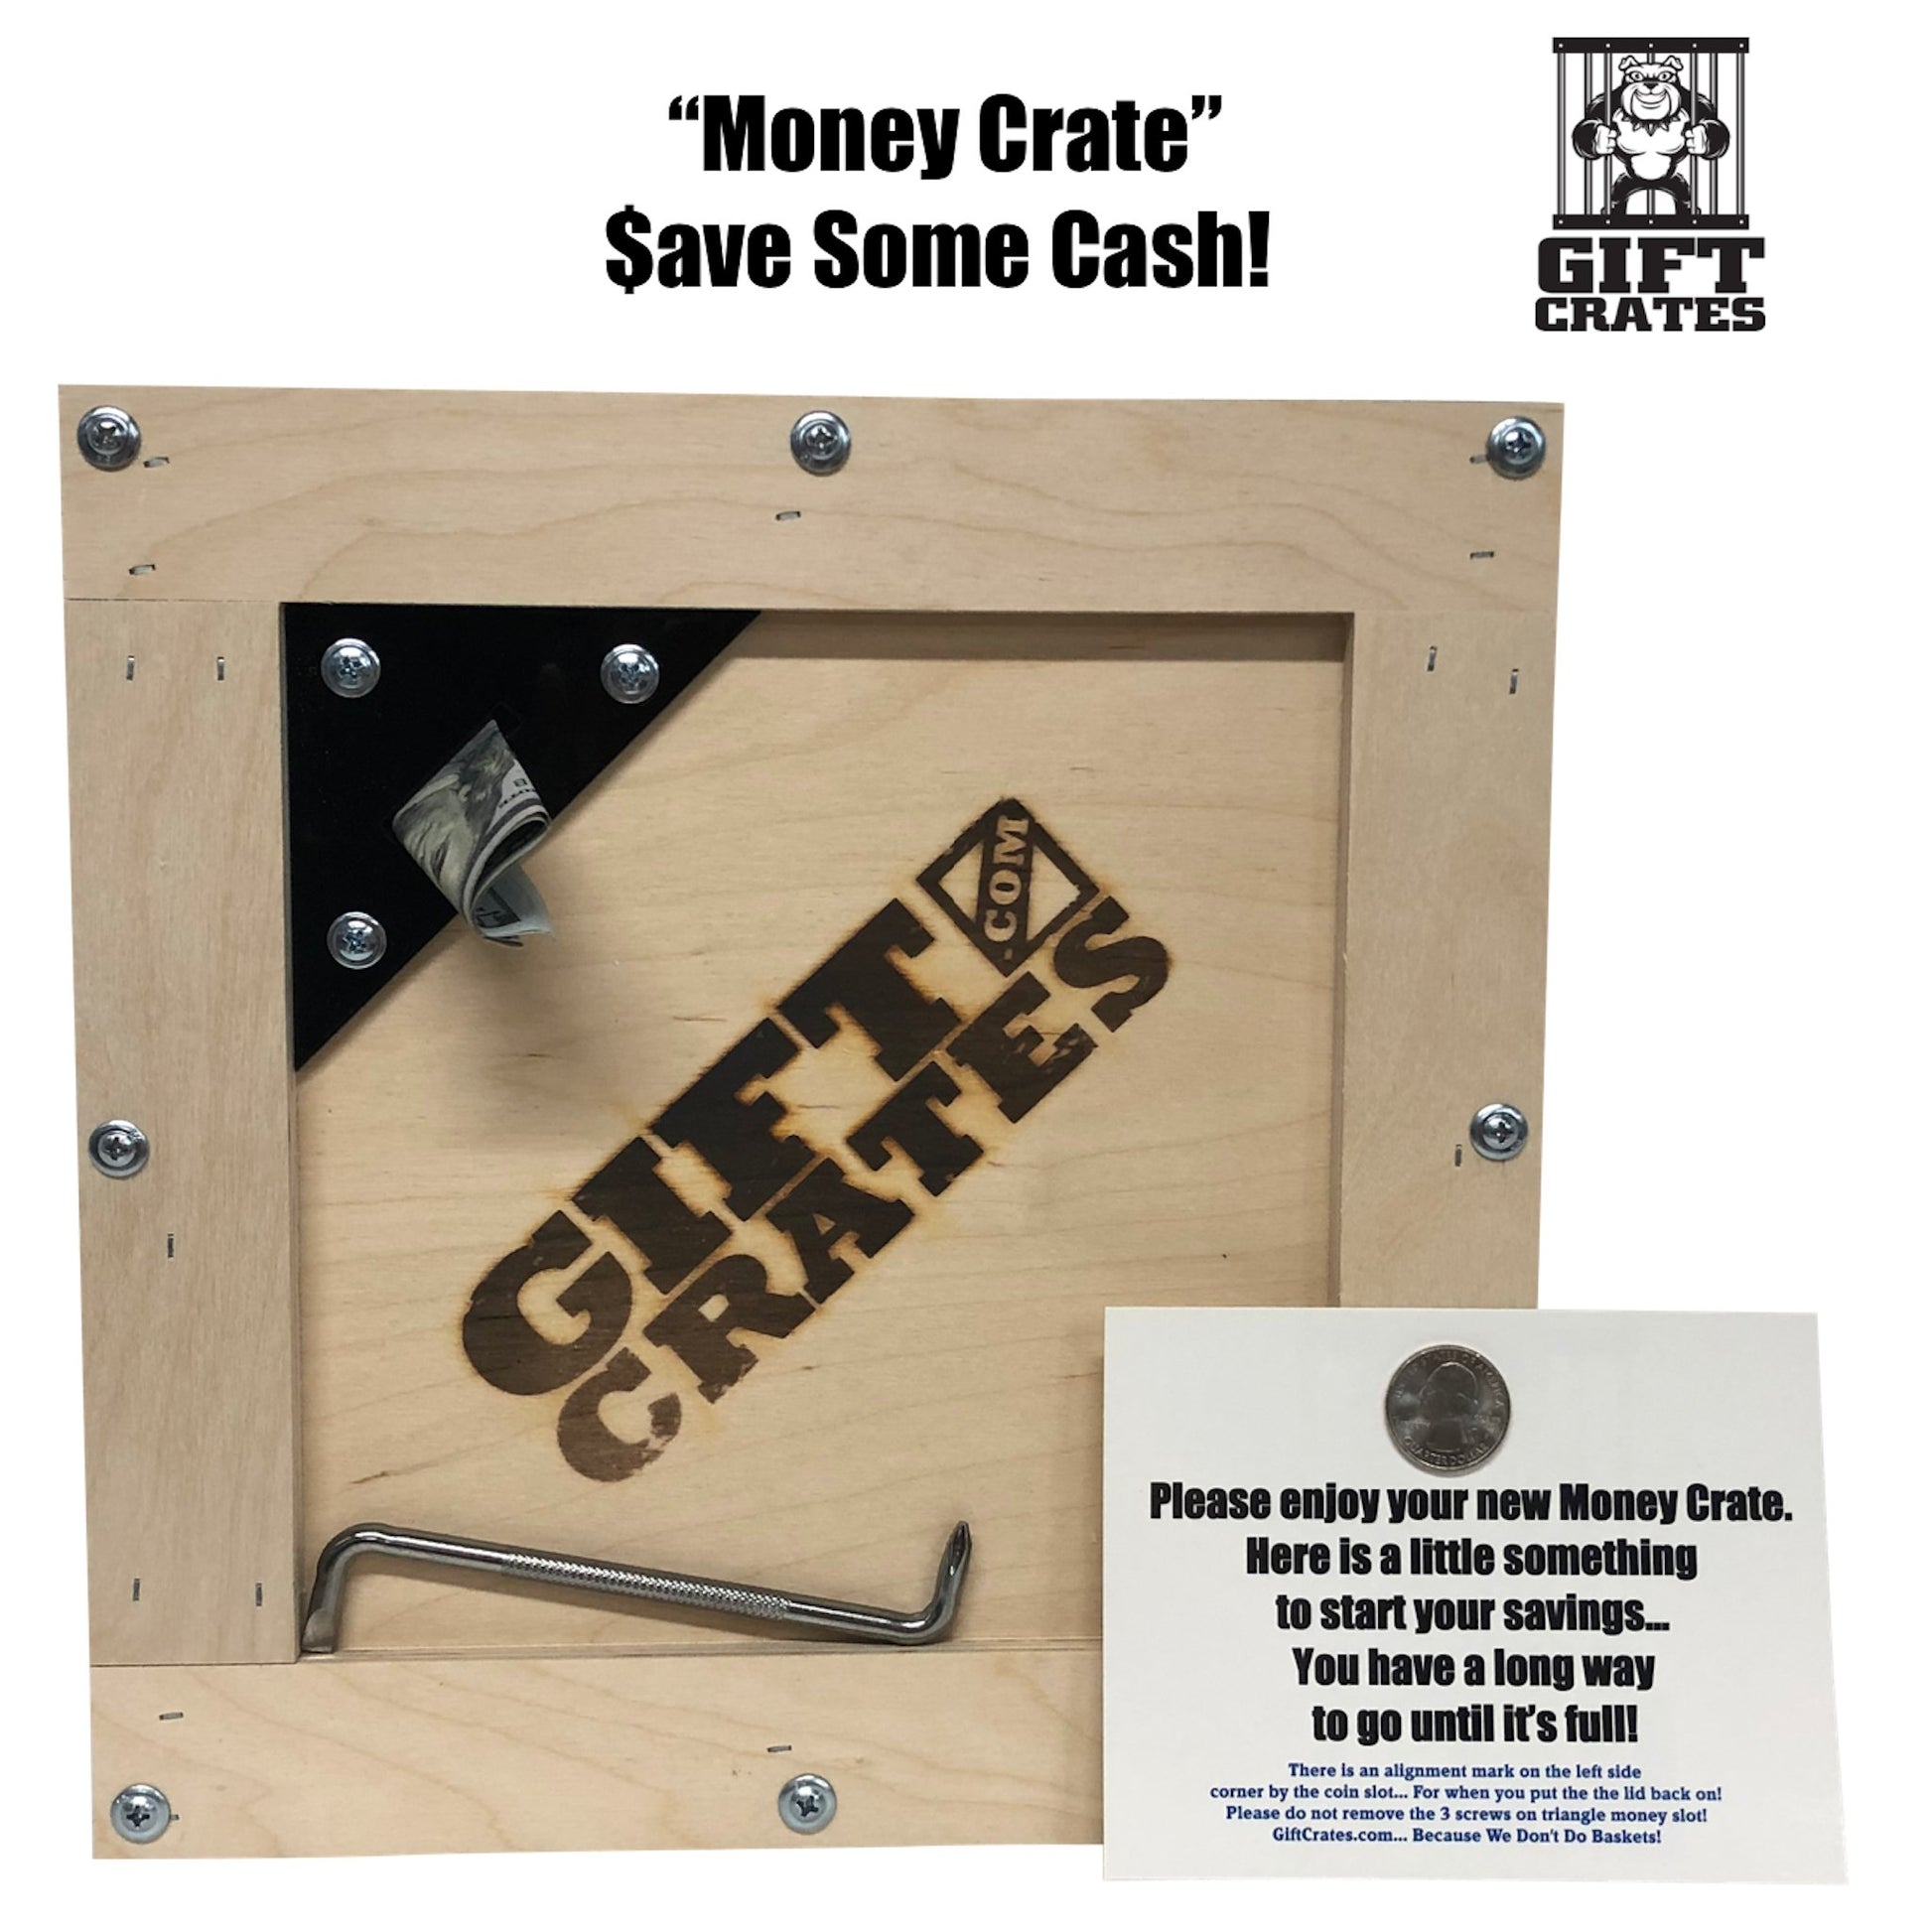 Football Tailgate Crate - Gift Crates